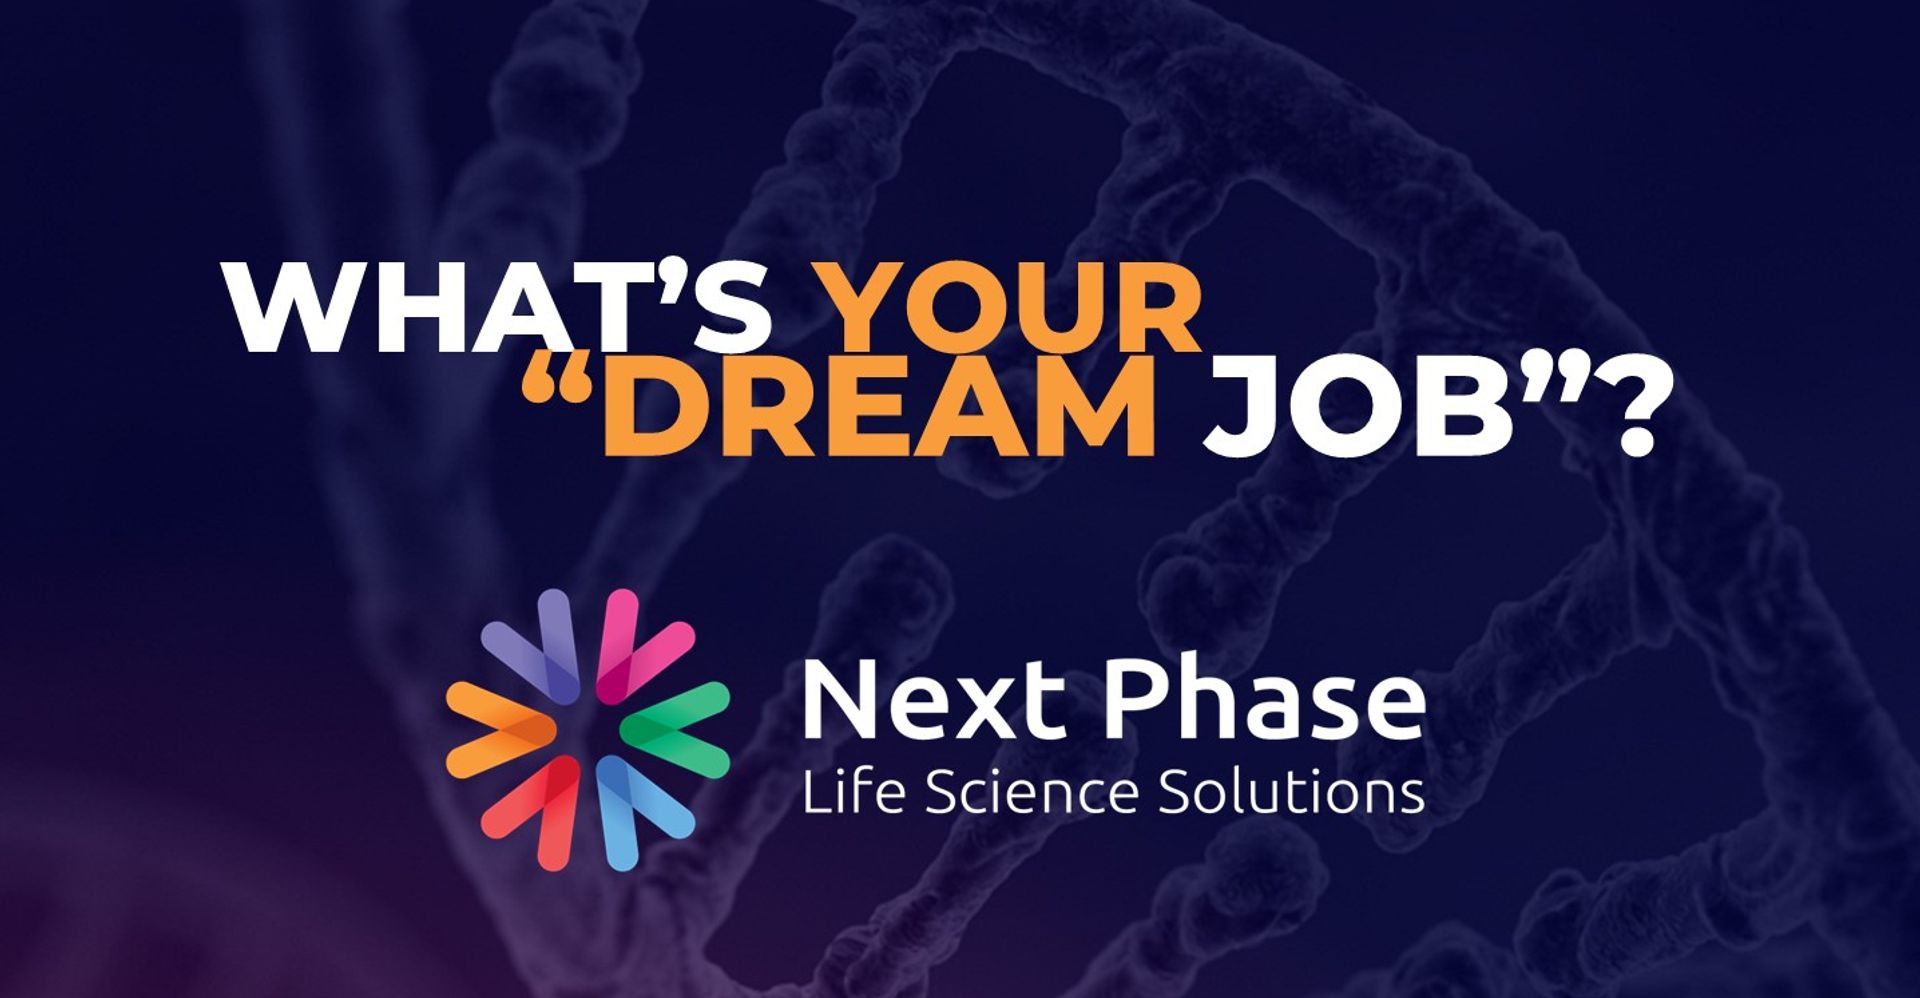 Here at Next Phase Recruitment based in Horsham, we love helping people to explore different potential career paths